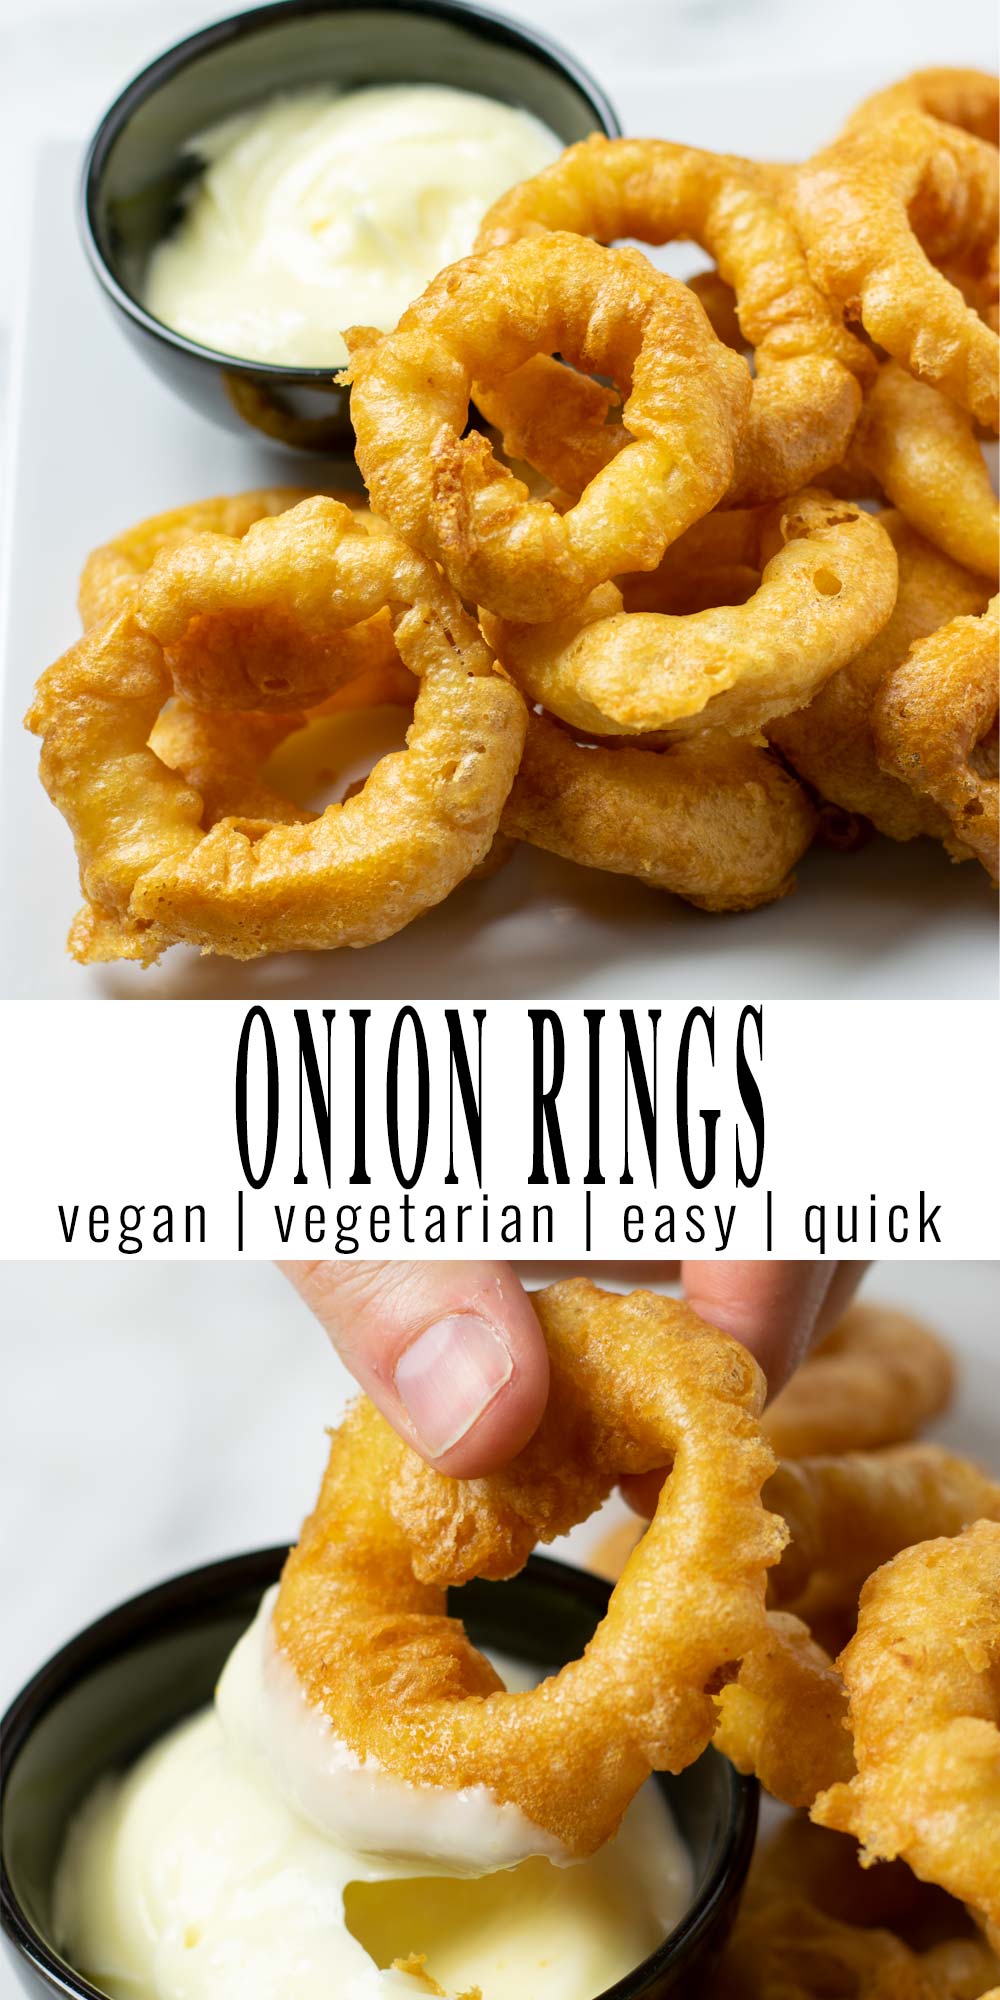 Collage of two pictures of the Onion Rings with recipe title text.